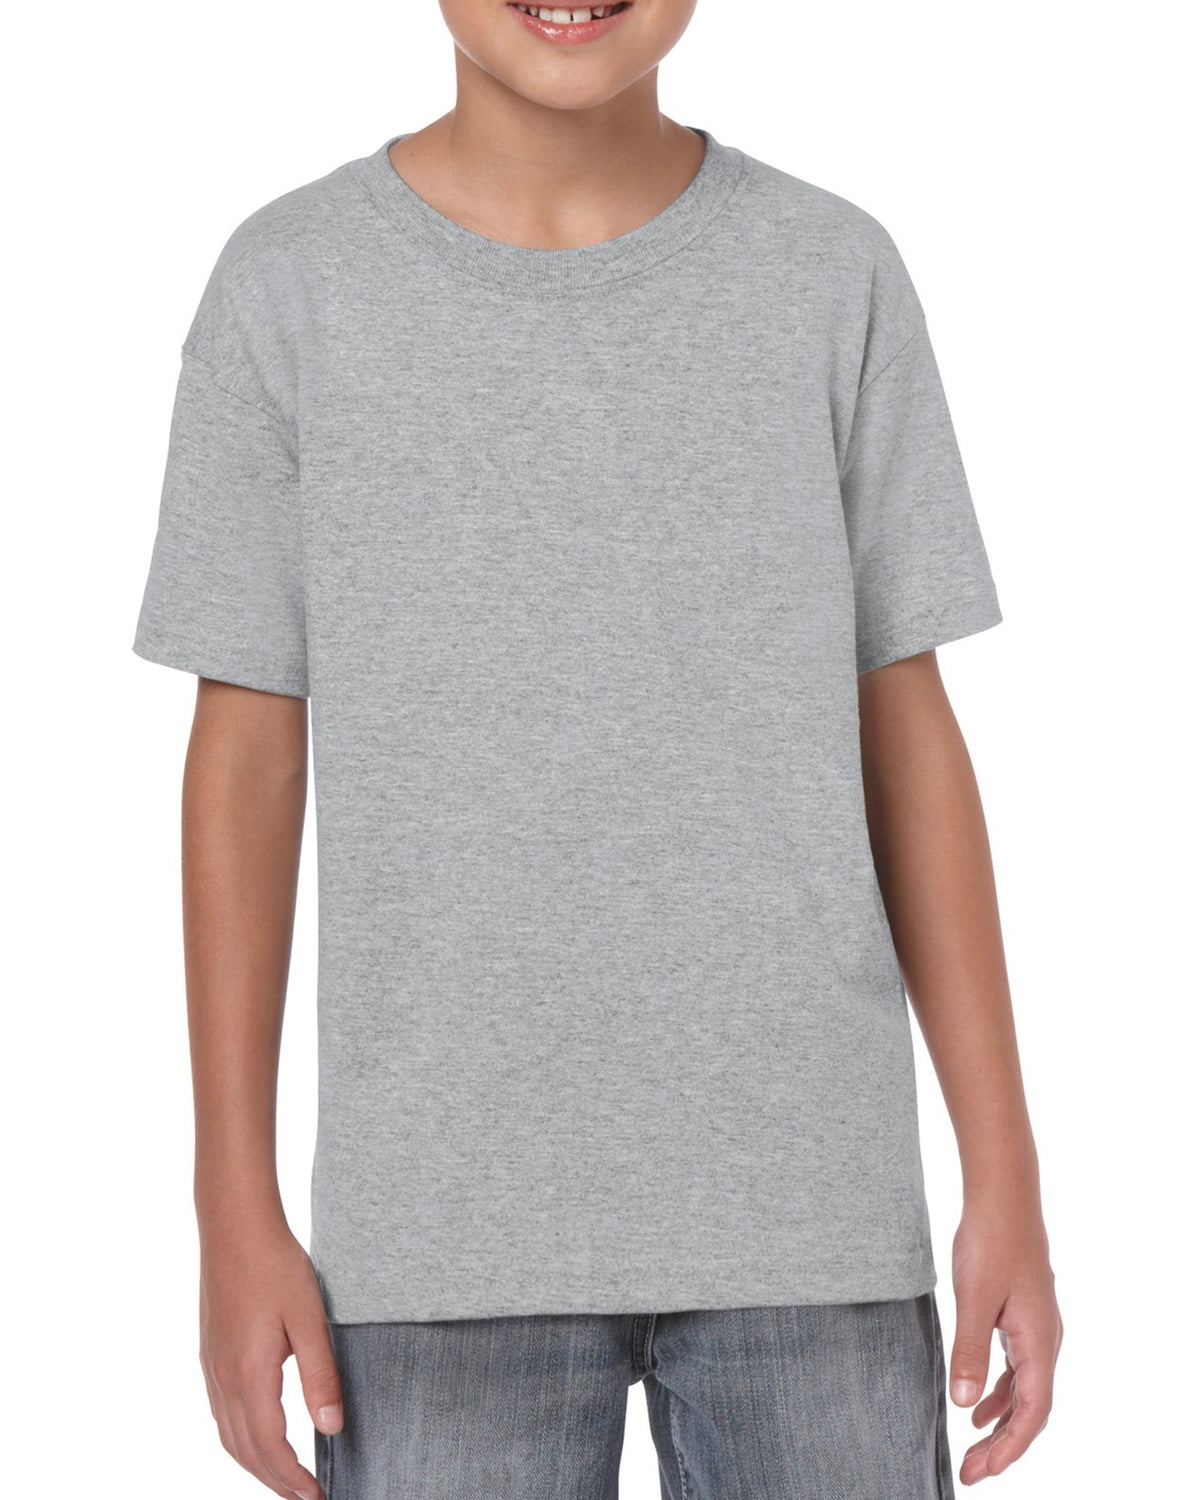 Youth Heavy Cotton Multi Color T-Shirt Color Sport Grey X-Small Size